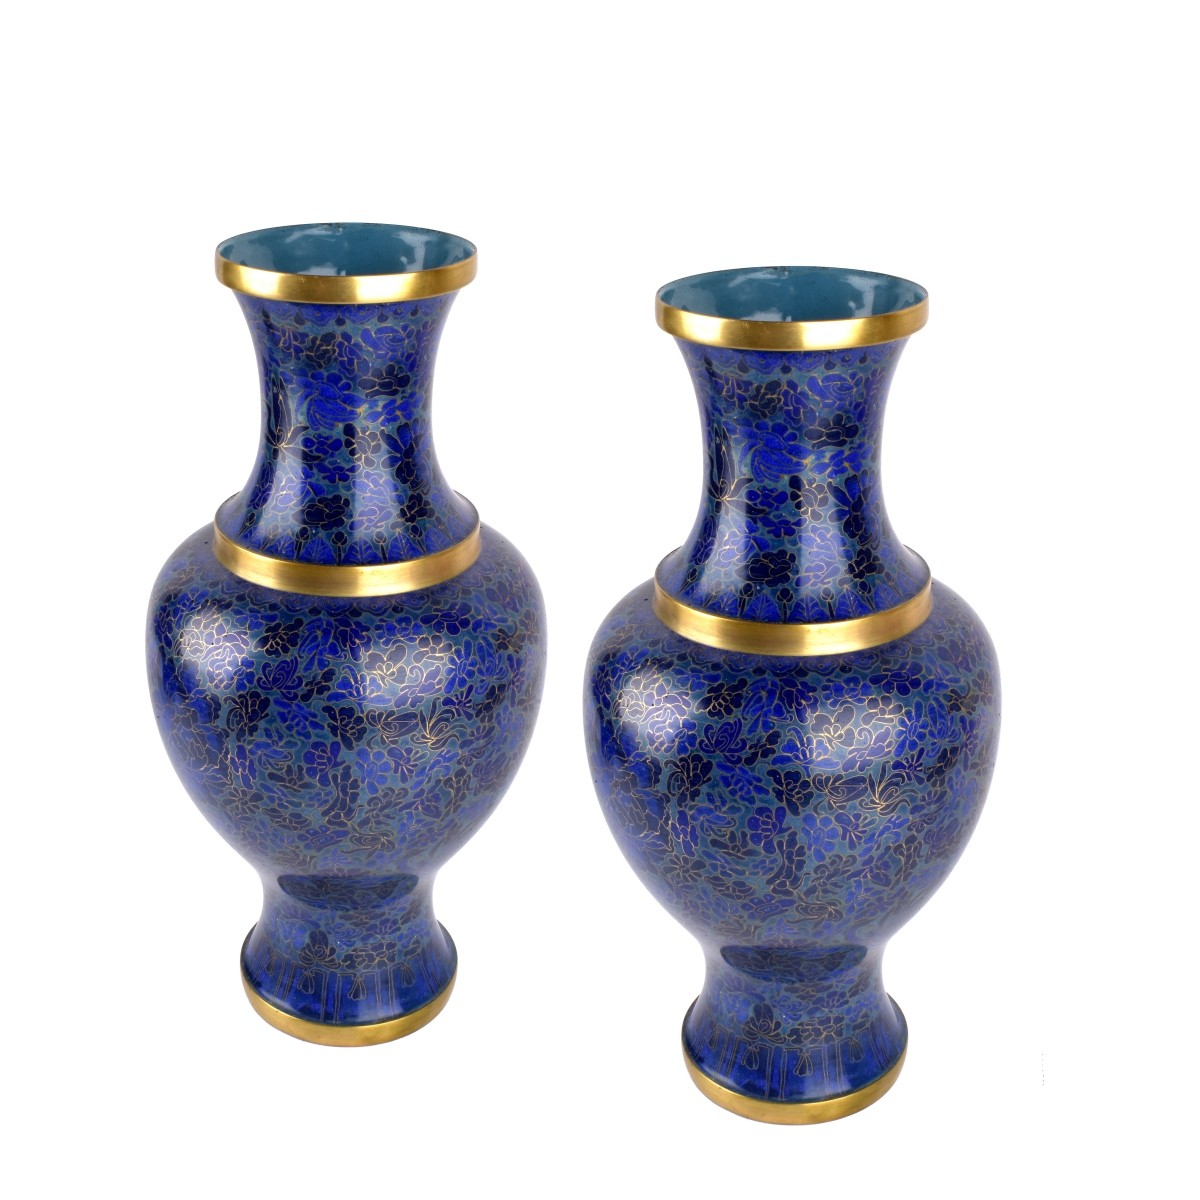 Pair of Tall Chinese Cloisonne Vases